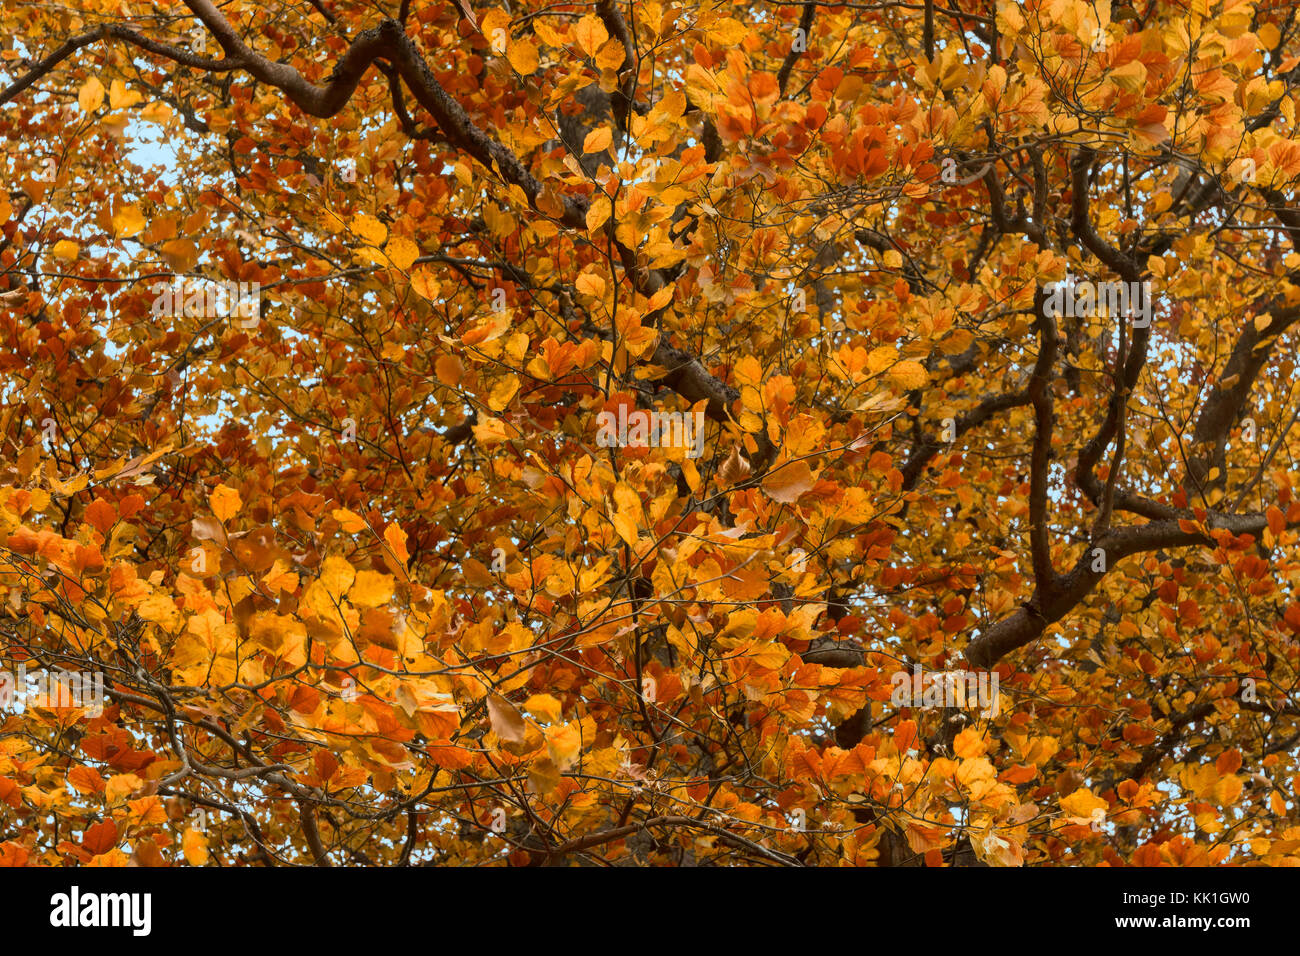 Yellow, orange and golden leaves of Beech trees in autumn Stock Photo